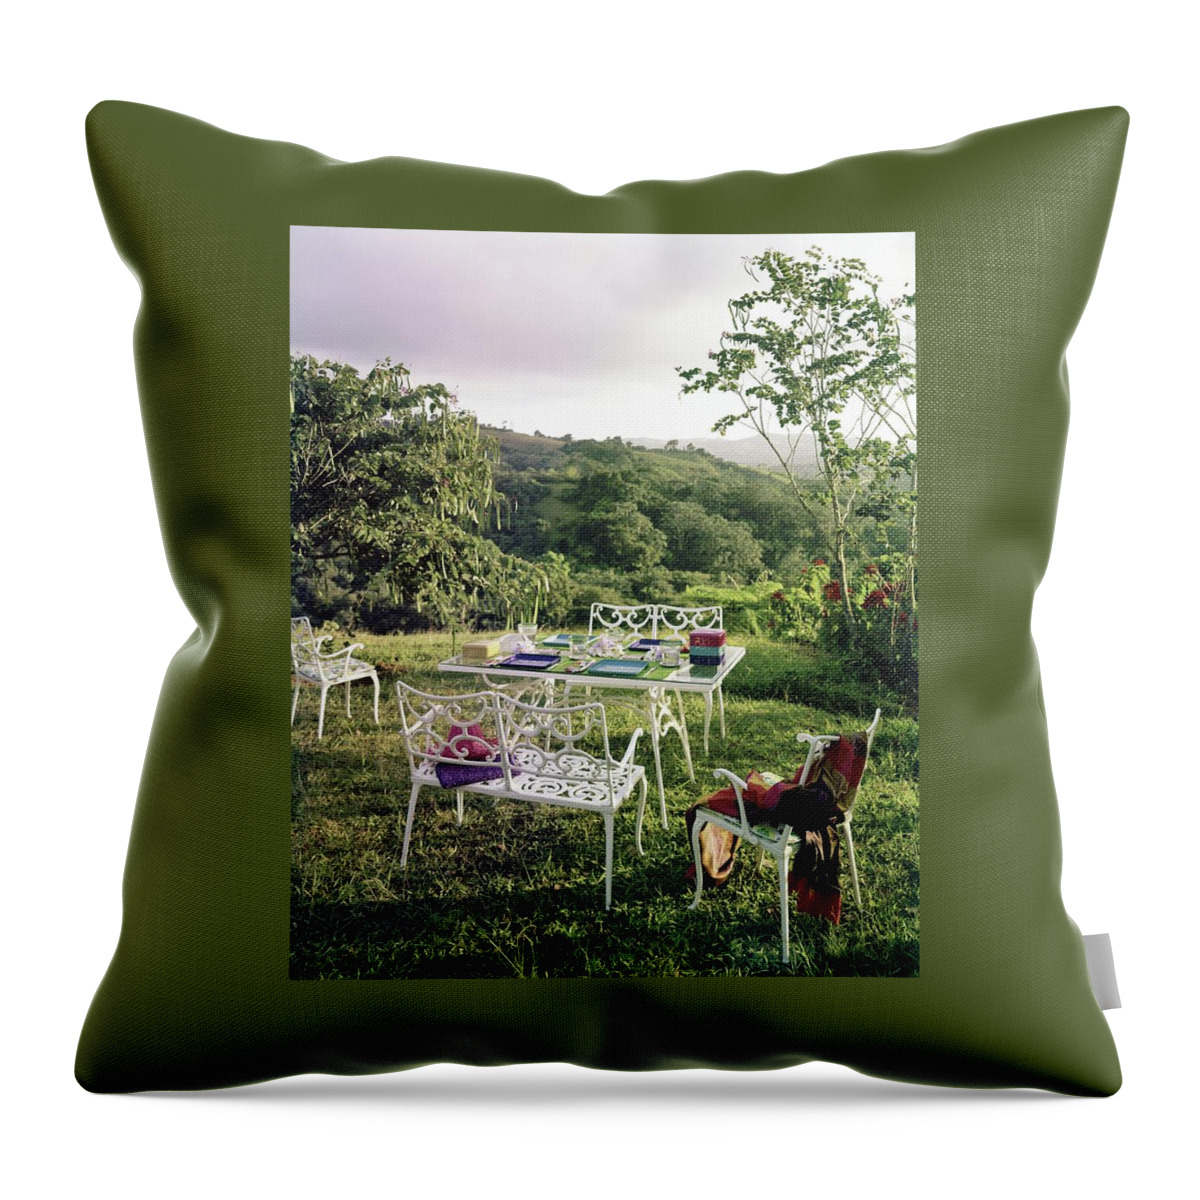 Outdoor Furniture By Lloyd On Grassy Hillside Throw Pillow